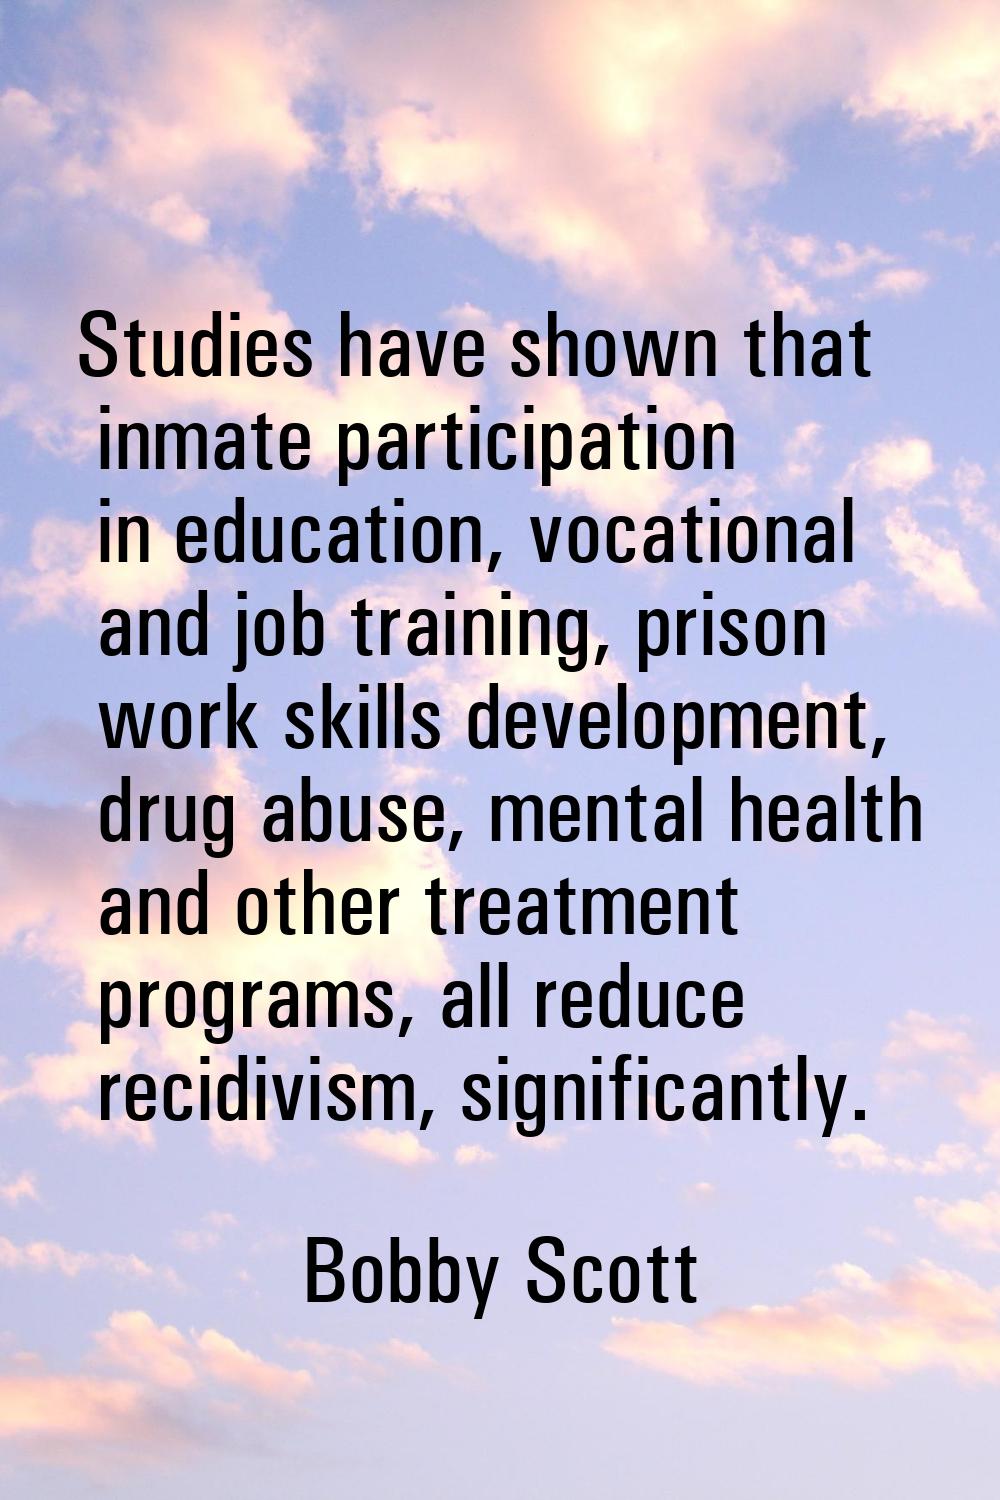 Studies have shown that inmate participation in education, vocational and job training, prison work